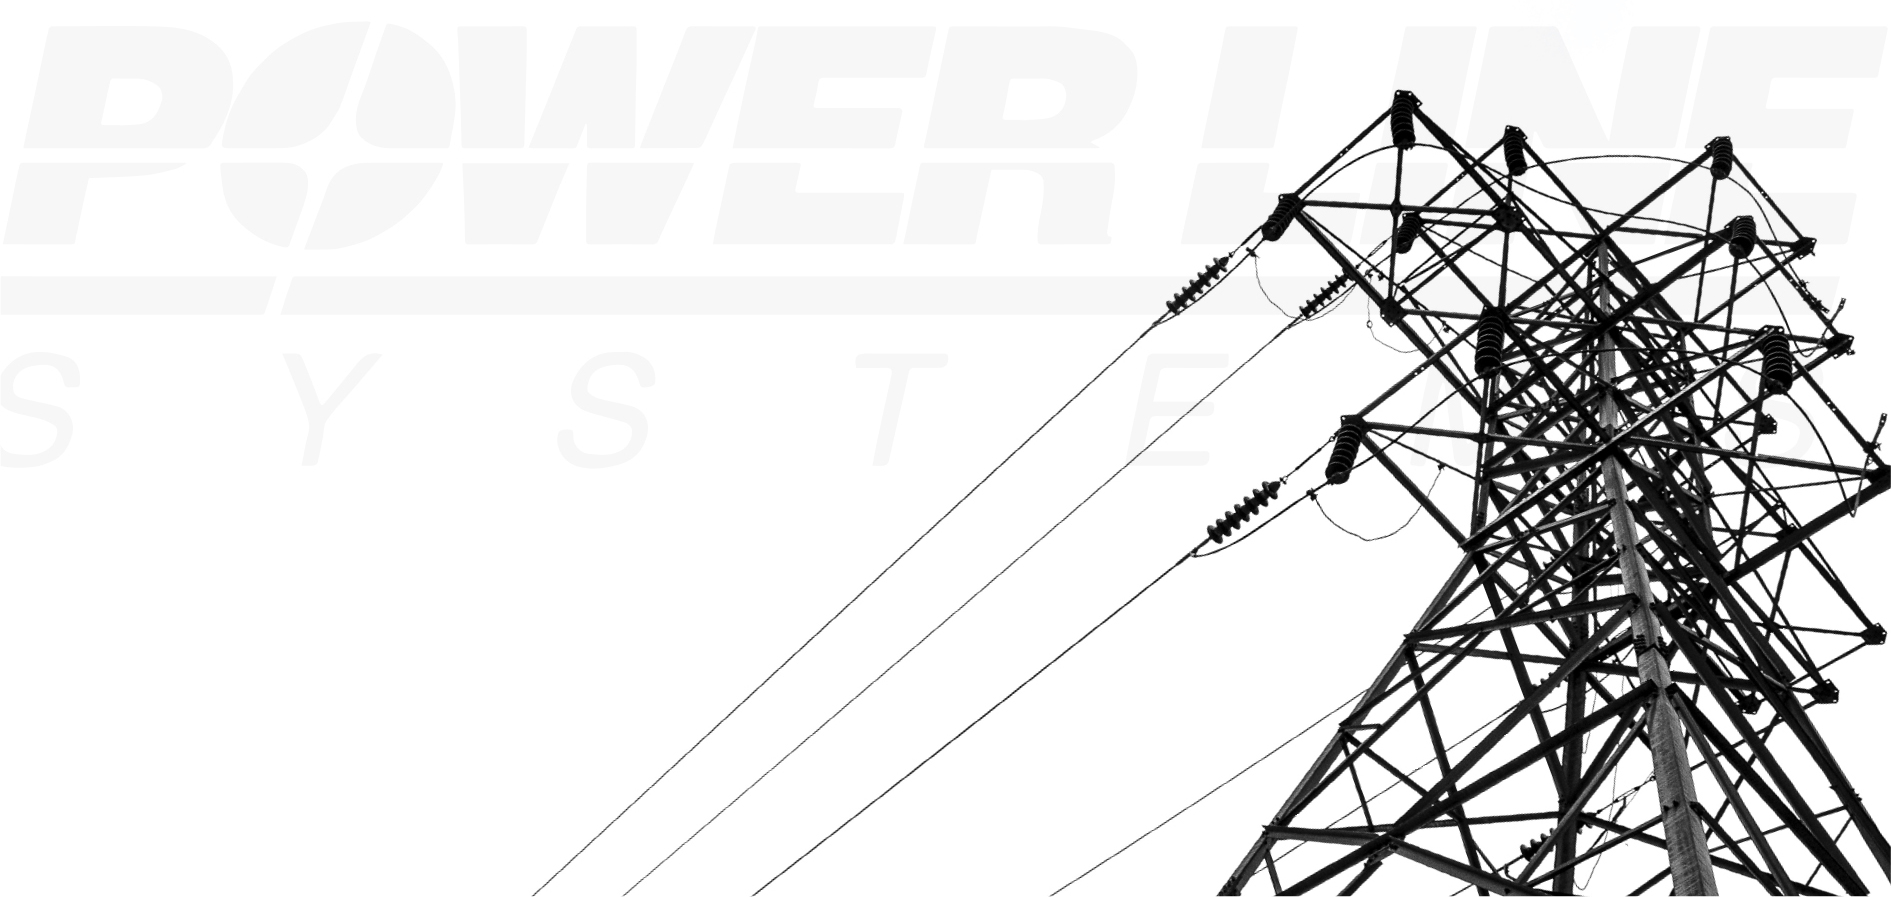 APD Engineering: Transmission & Distribution Power Line & Cable Design